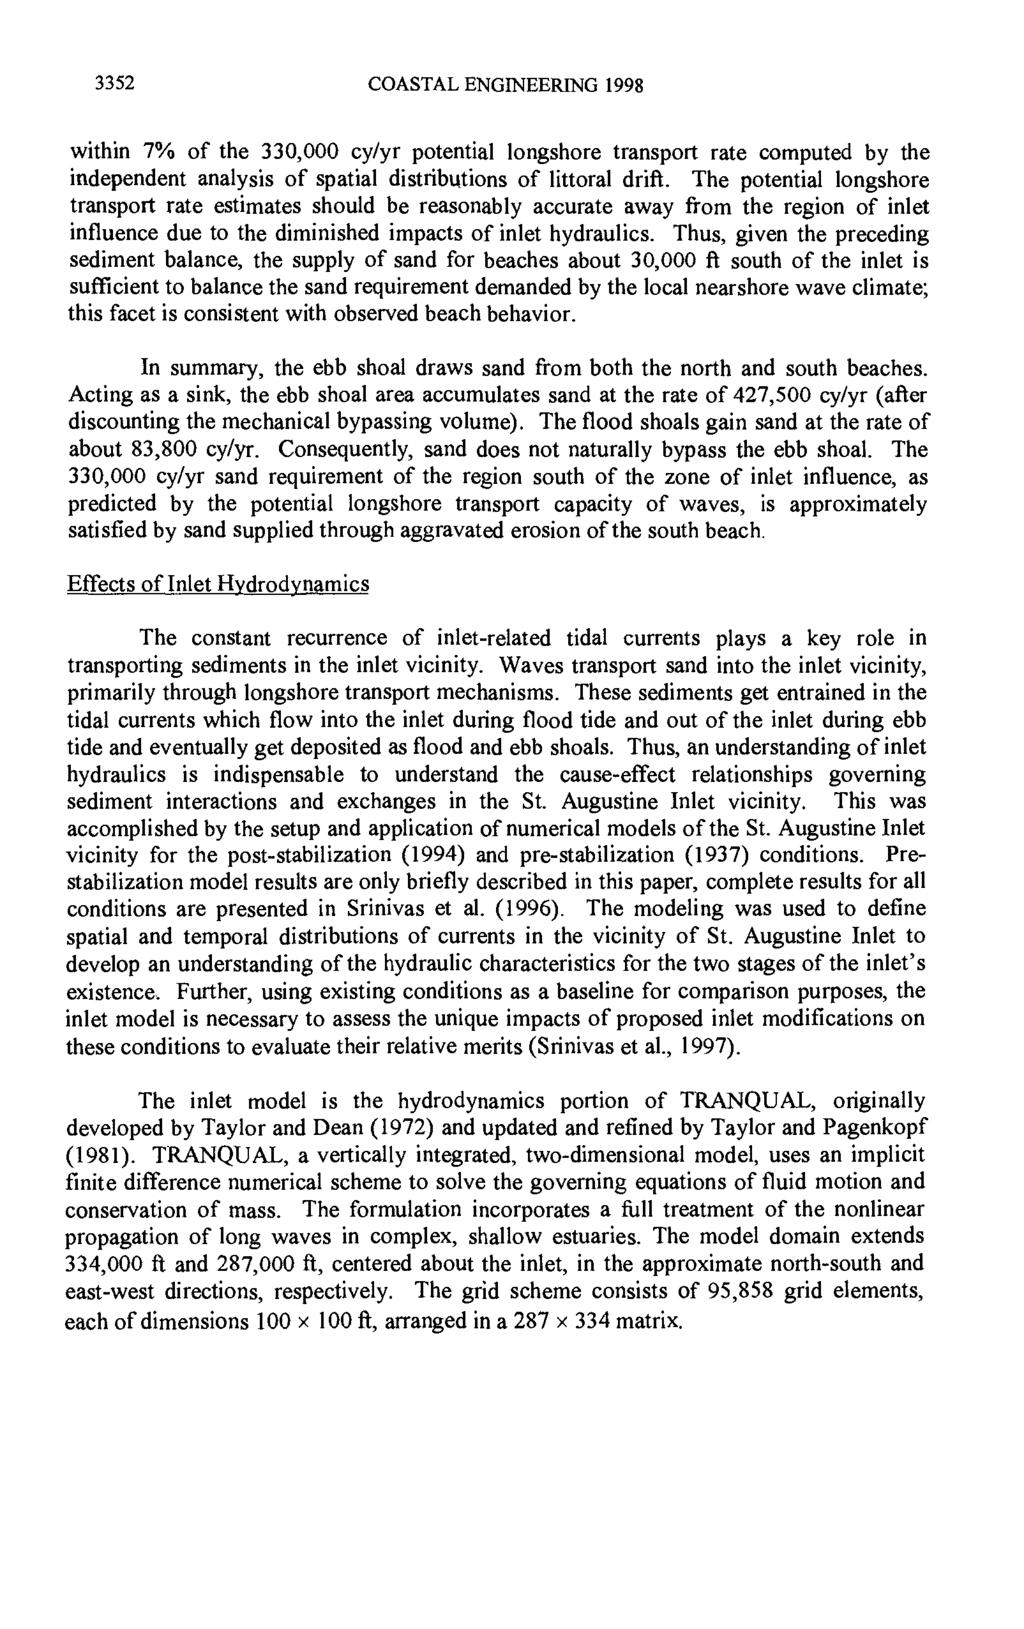 3352 COASTAL ENGINEERING 1998 within 7% of the 330,000 cy/yr potential longshore transport rate computed by the independent analysis of spatial distributions of littoral drift.